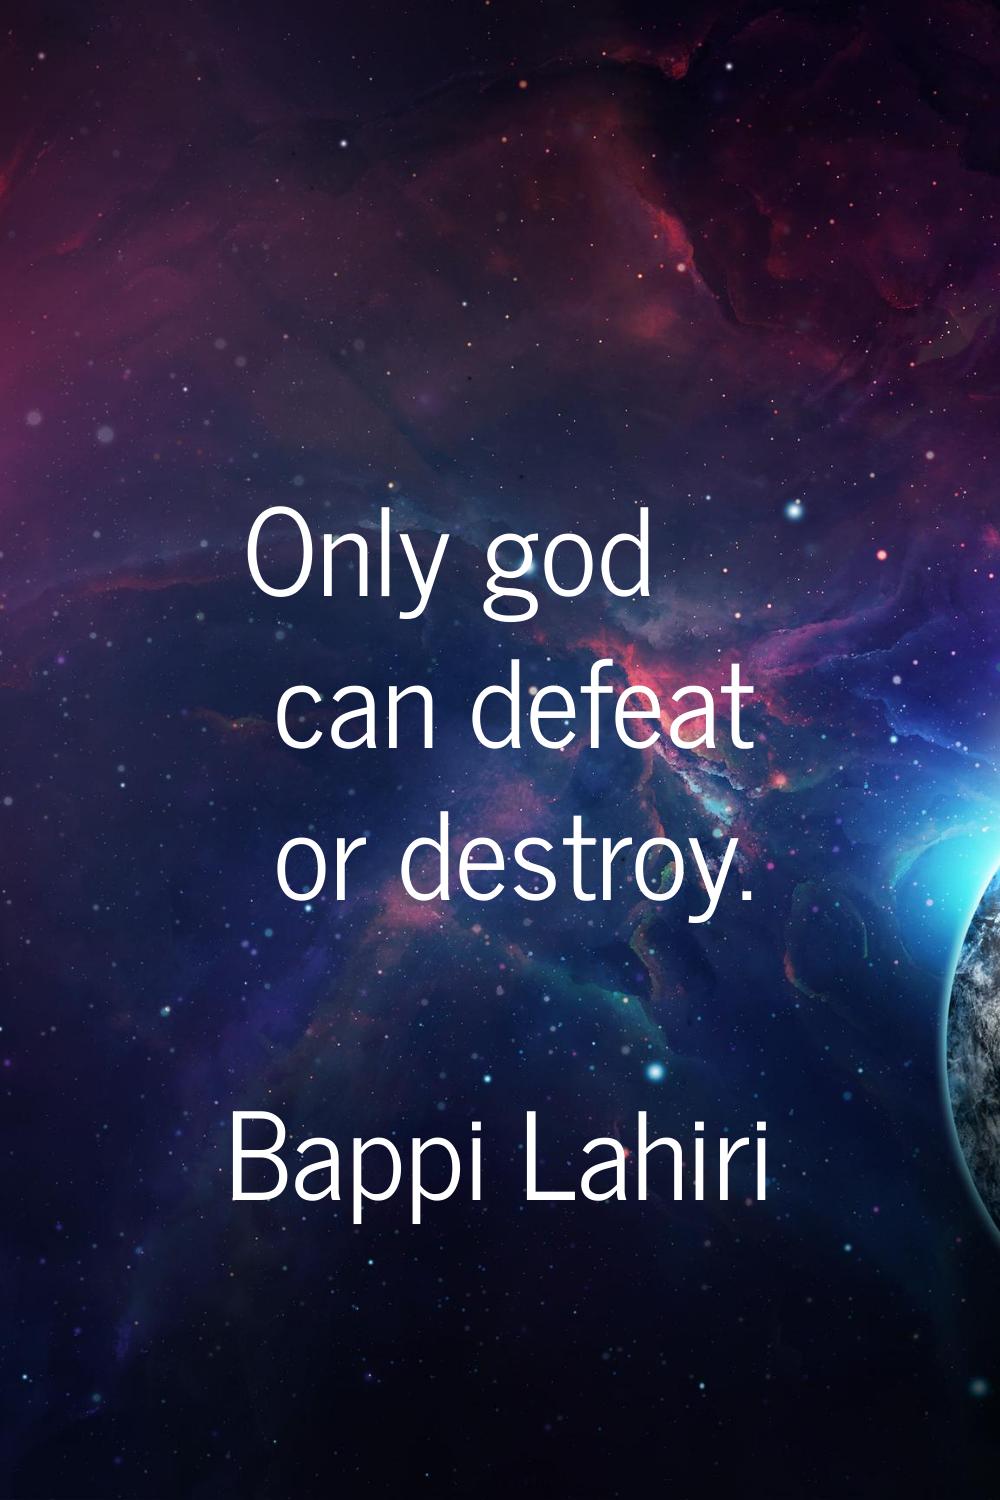 Only god can defeat or destroy.